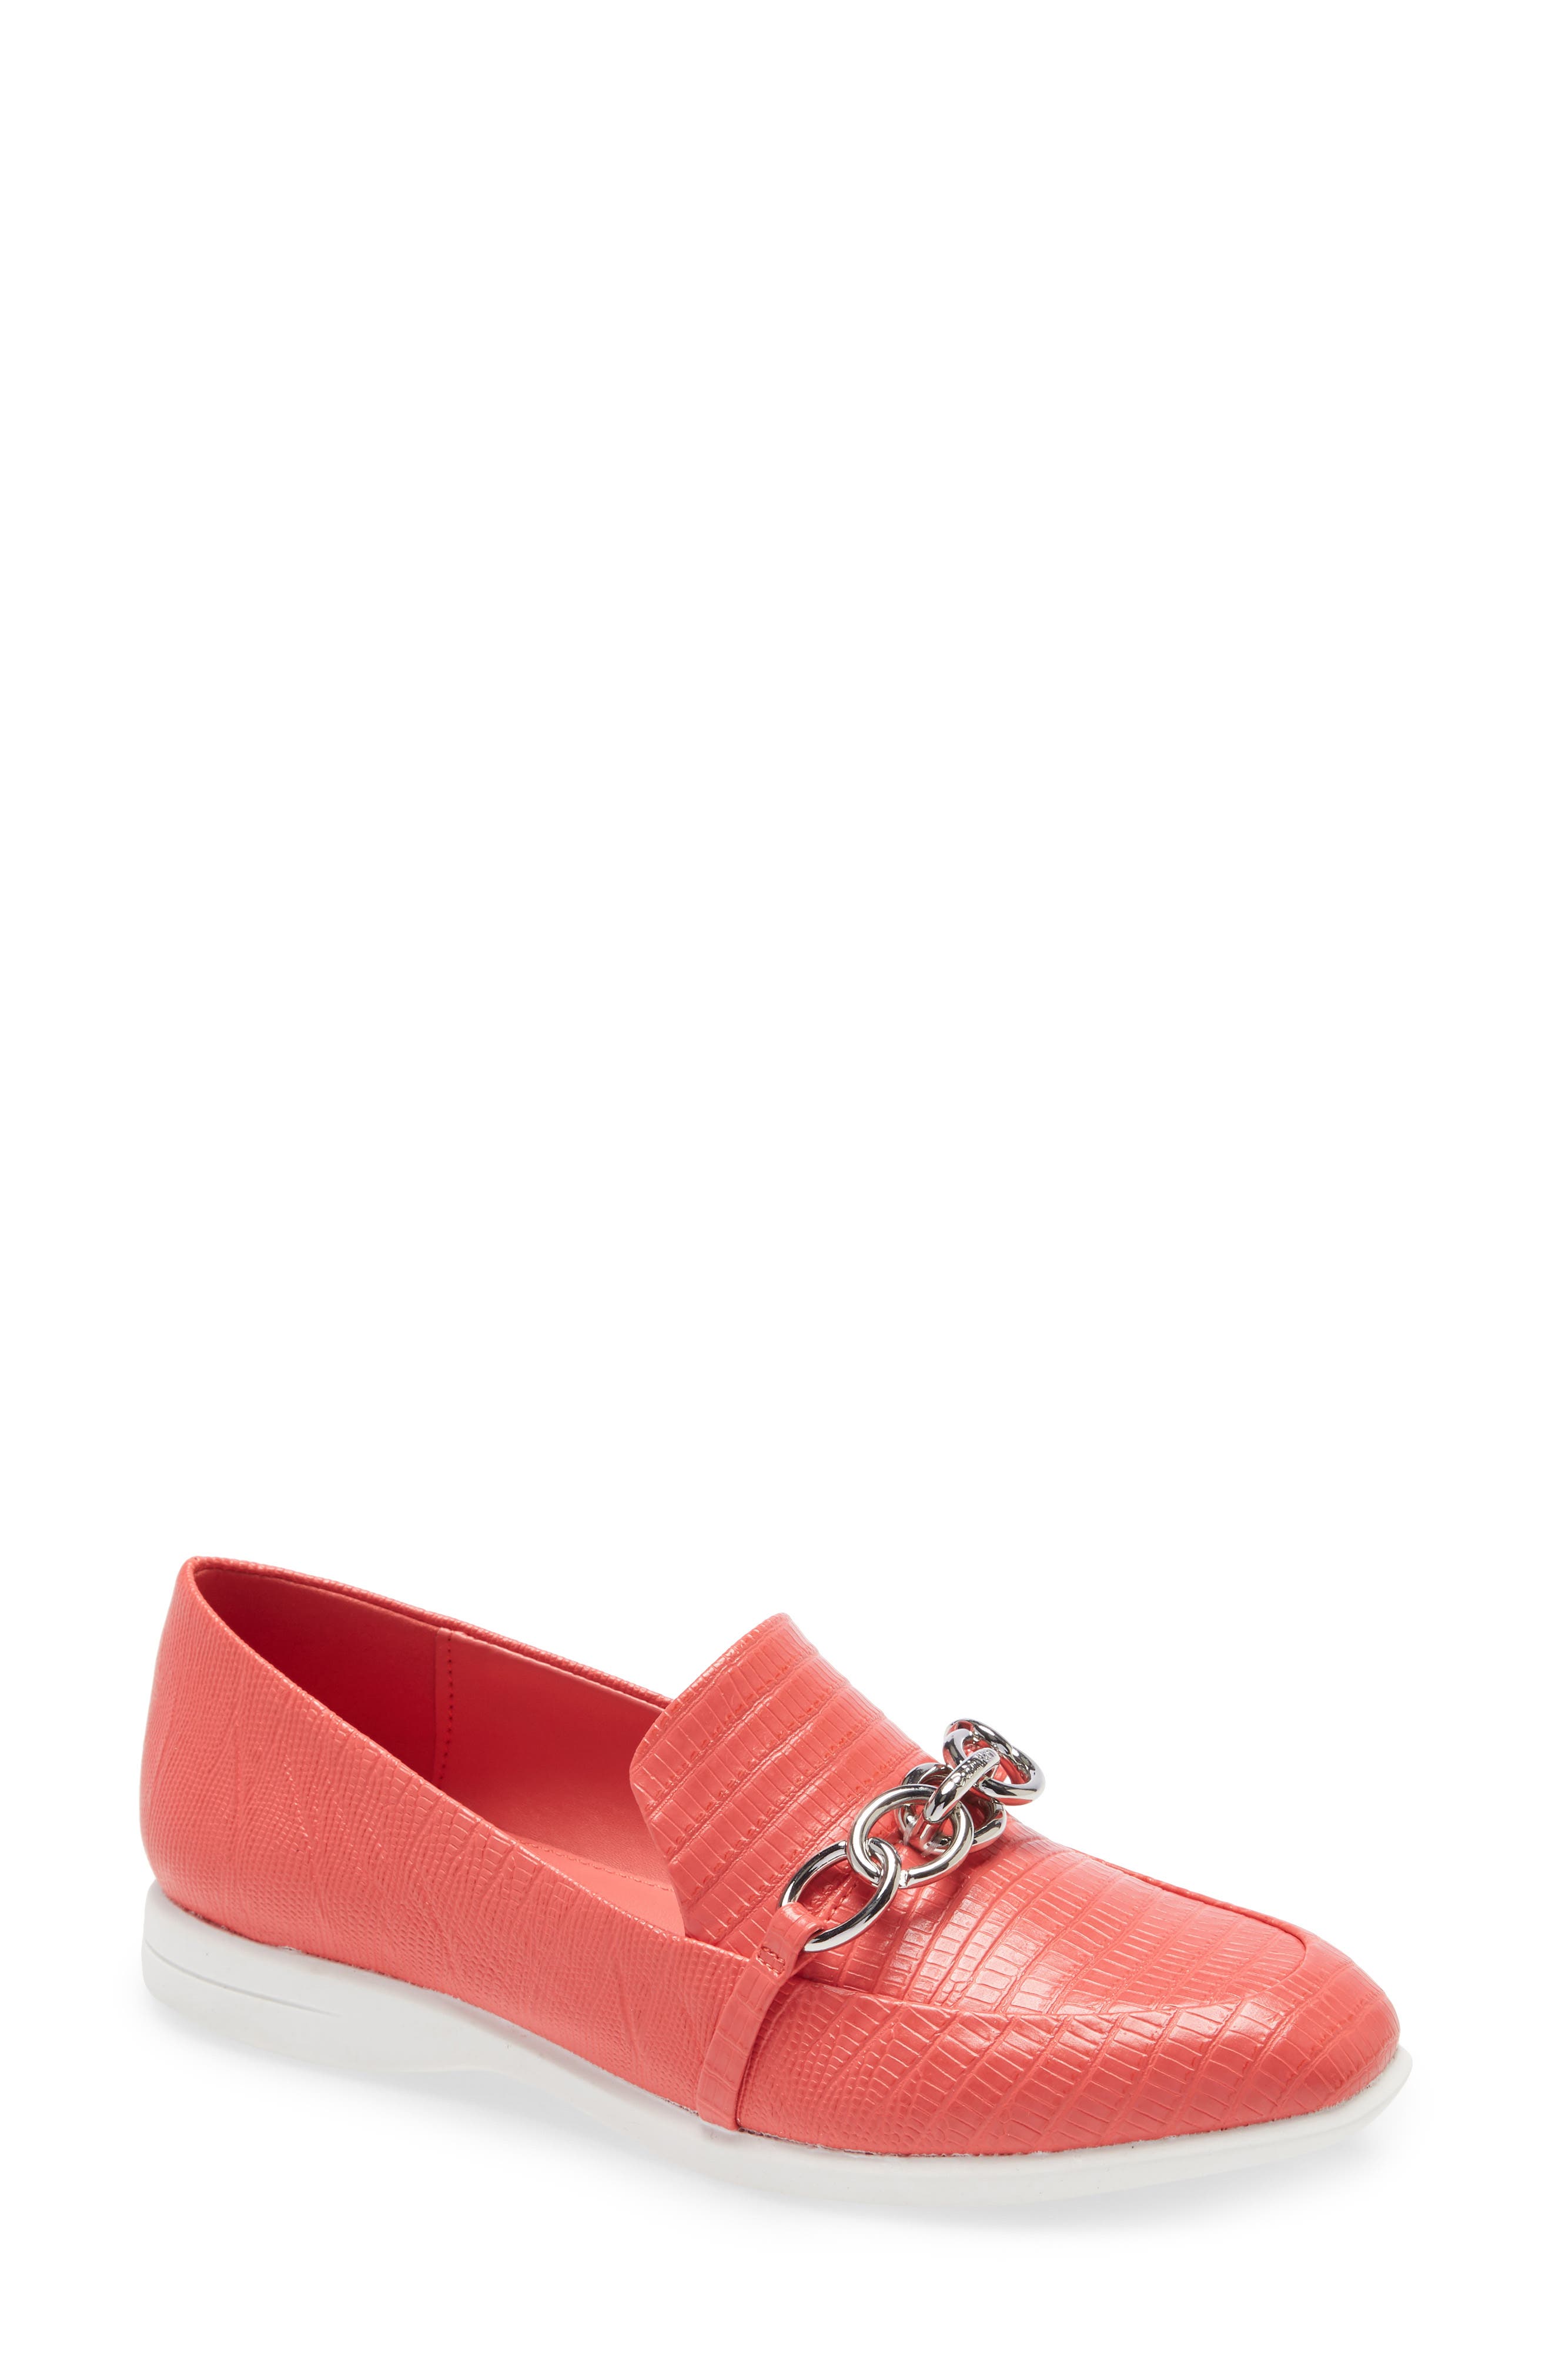 light pink loafers womens